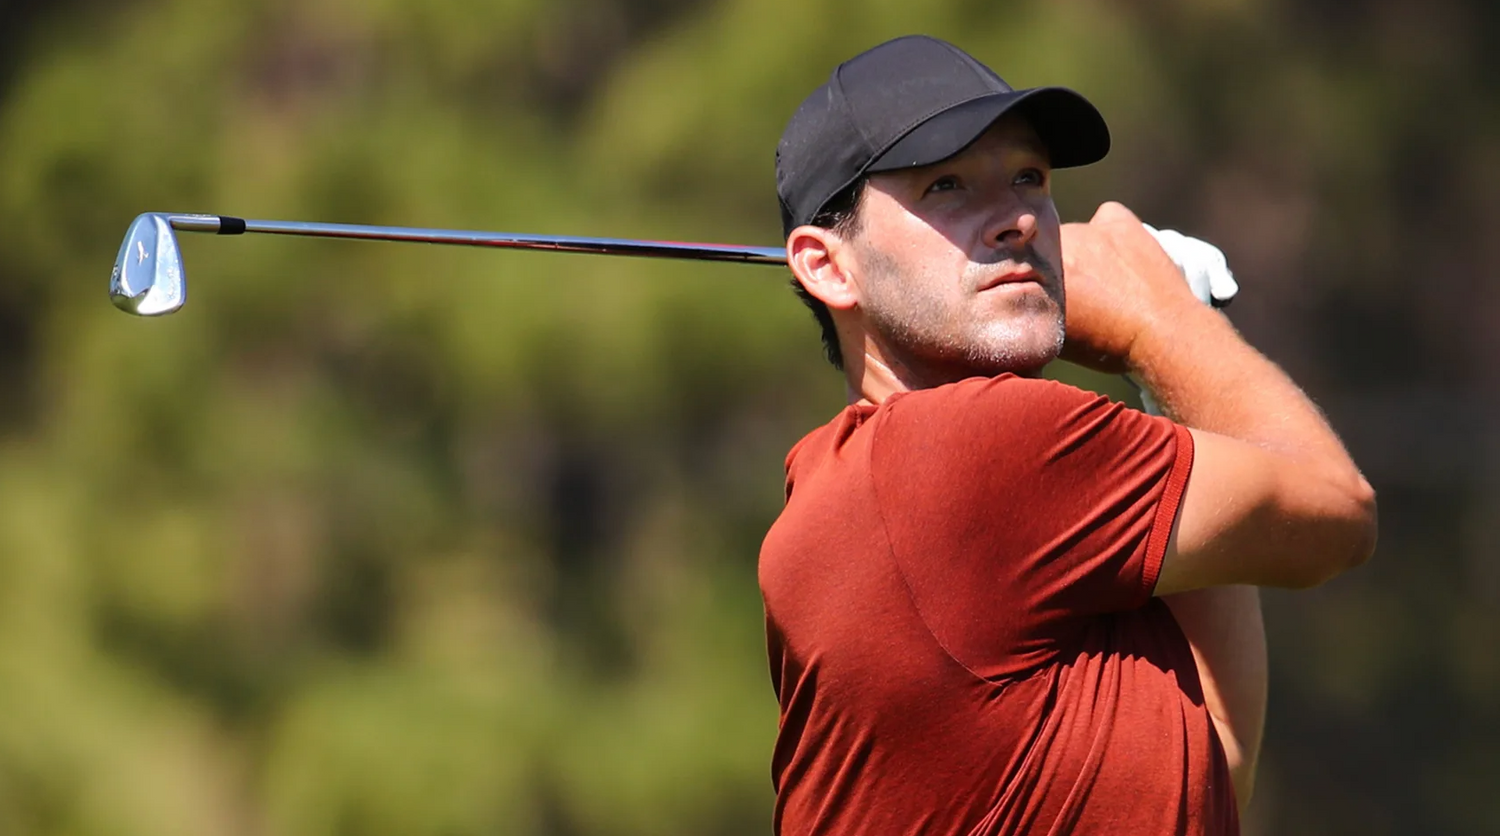 Tony Romo and renowned junior qualify for U.S. Amateur Four-Ball